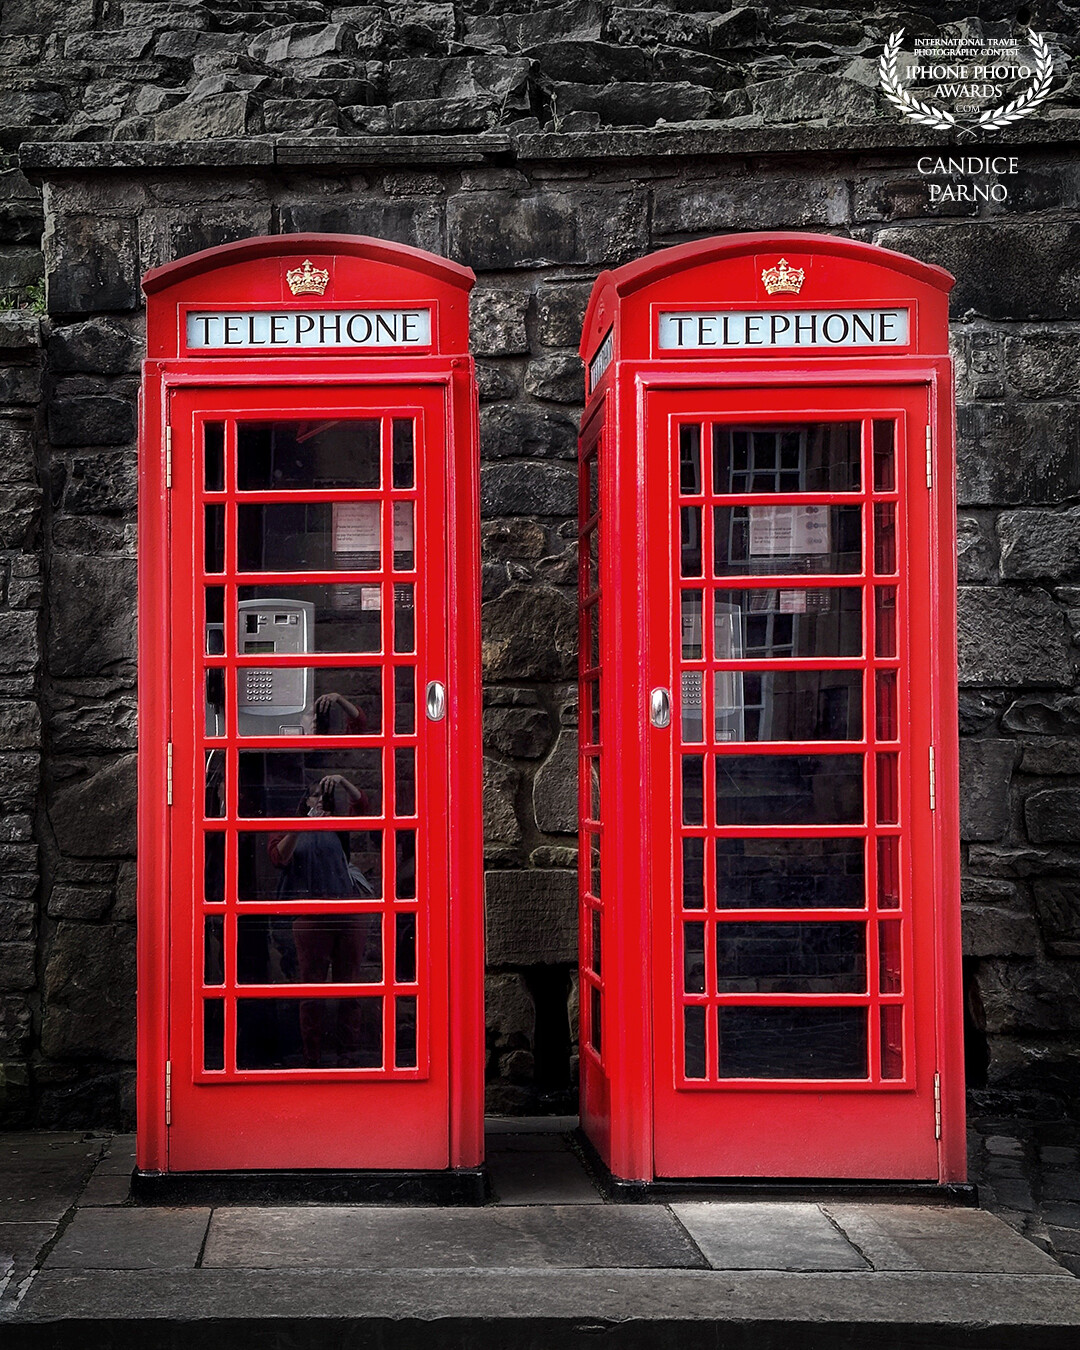 Red phone booths have always been fun to capture. These 2, side by side, gave the photo that extra symmetrical feel.